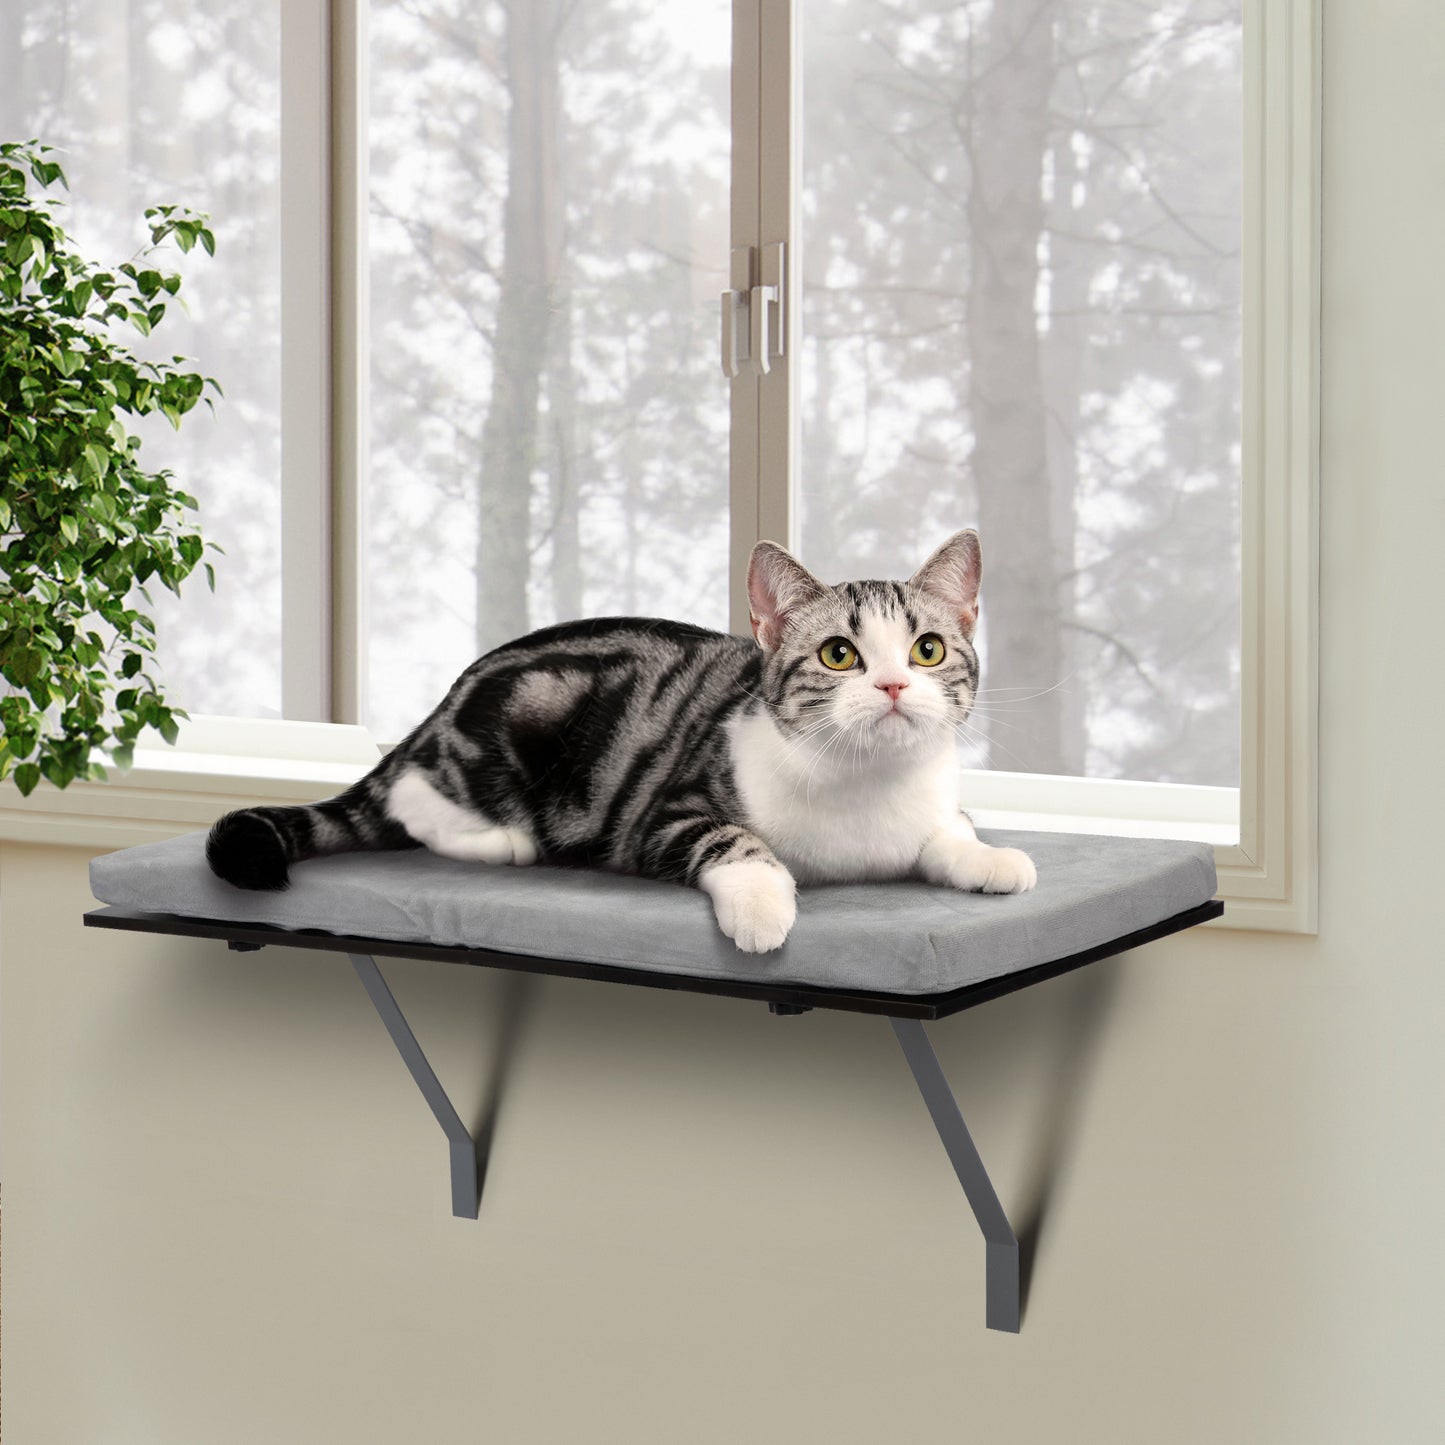 Cat Perch Window Mounted Shelf Bed with Velvet Cushion for Rest, Black Gray XH